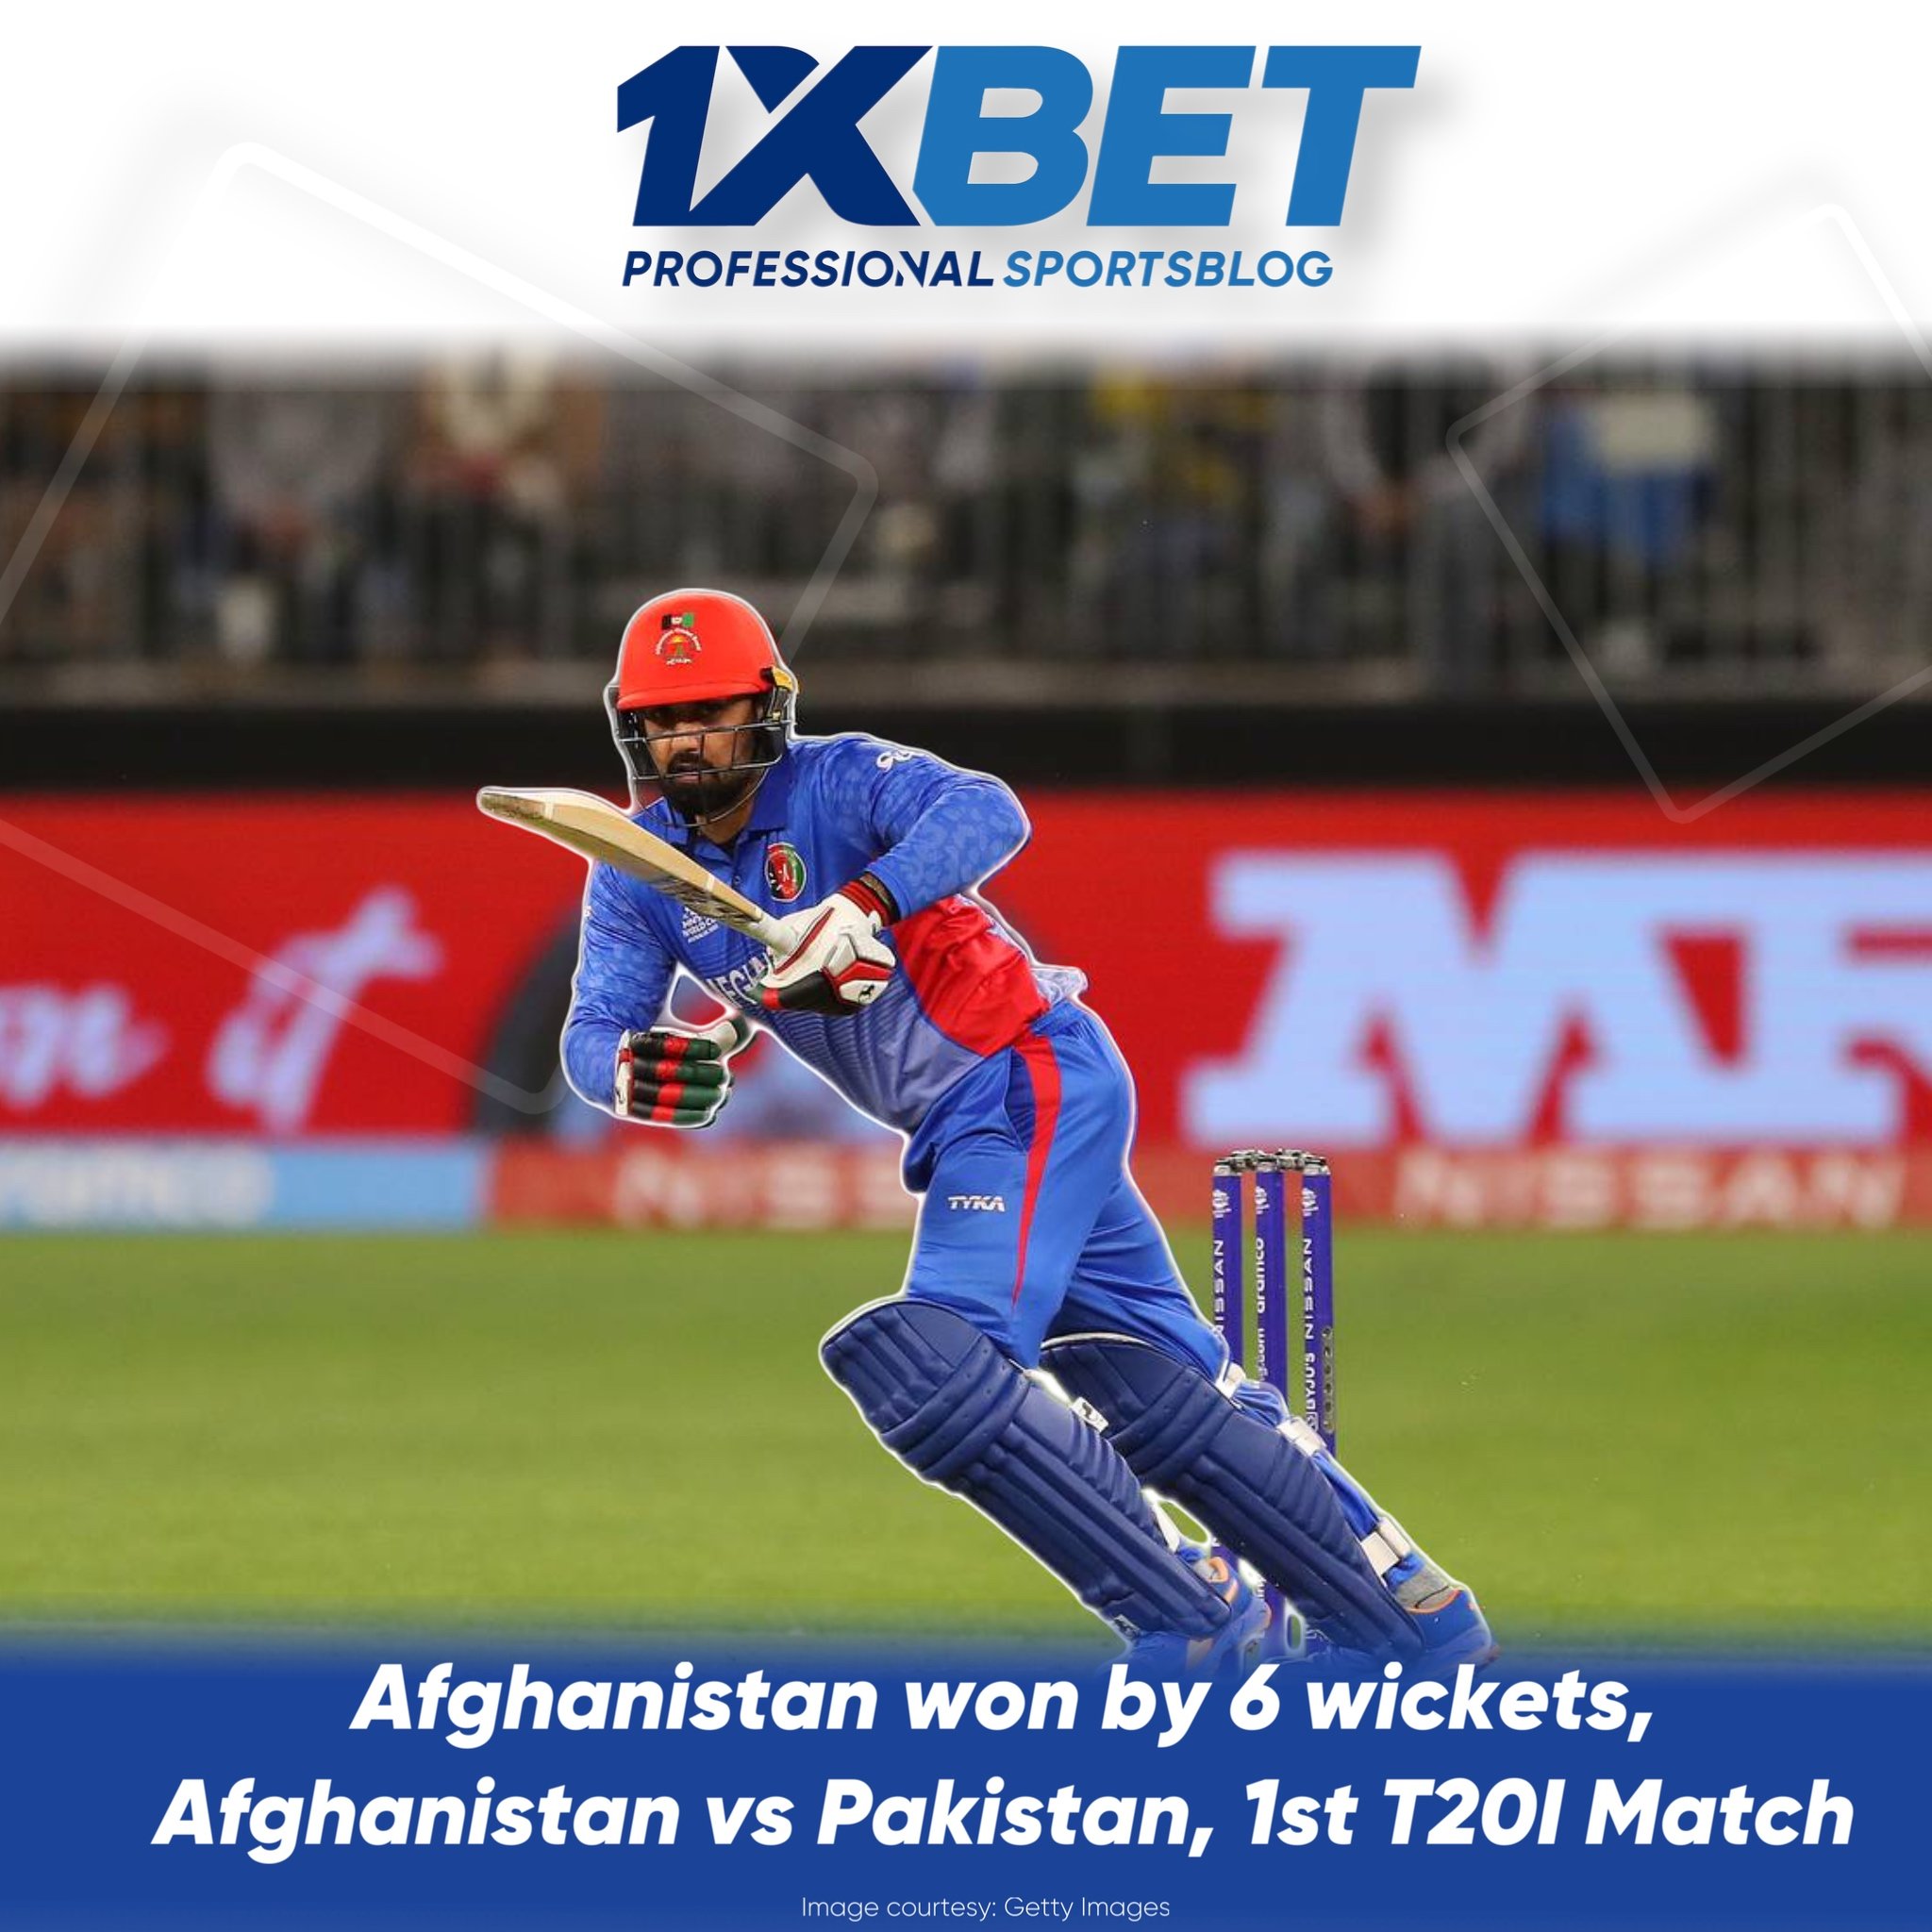 Afghanistan won by 6 wickets